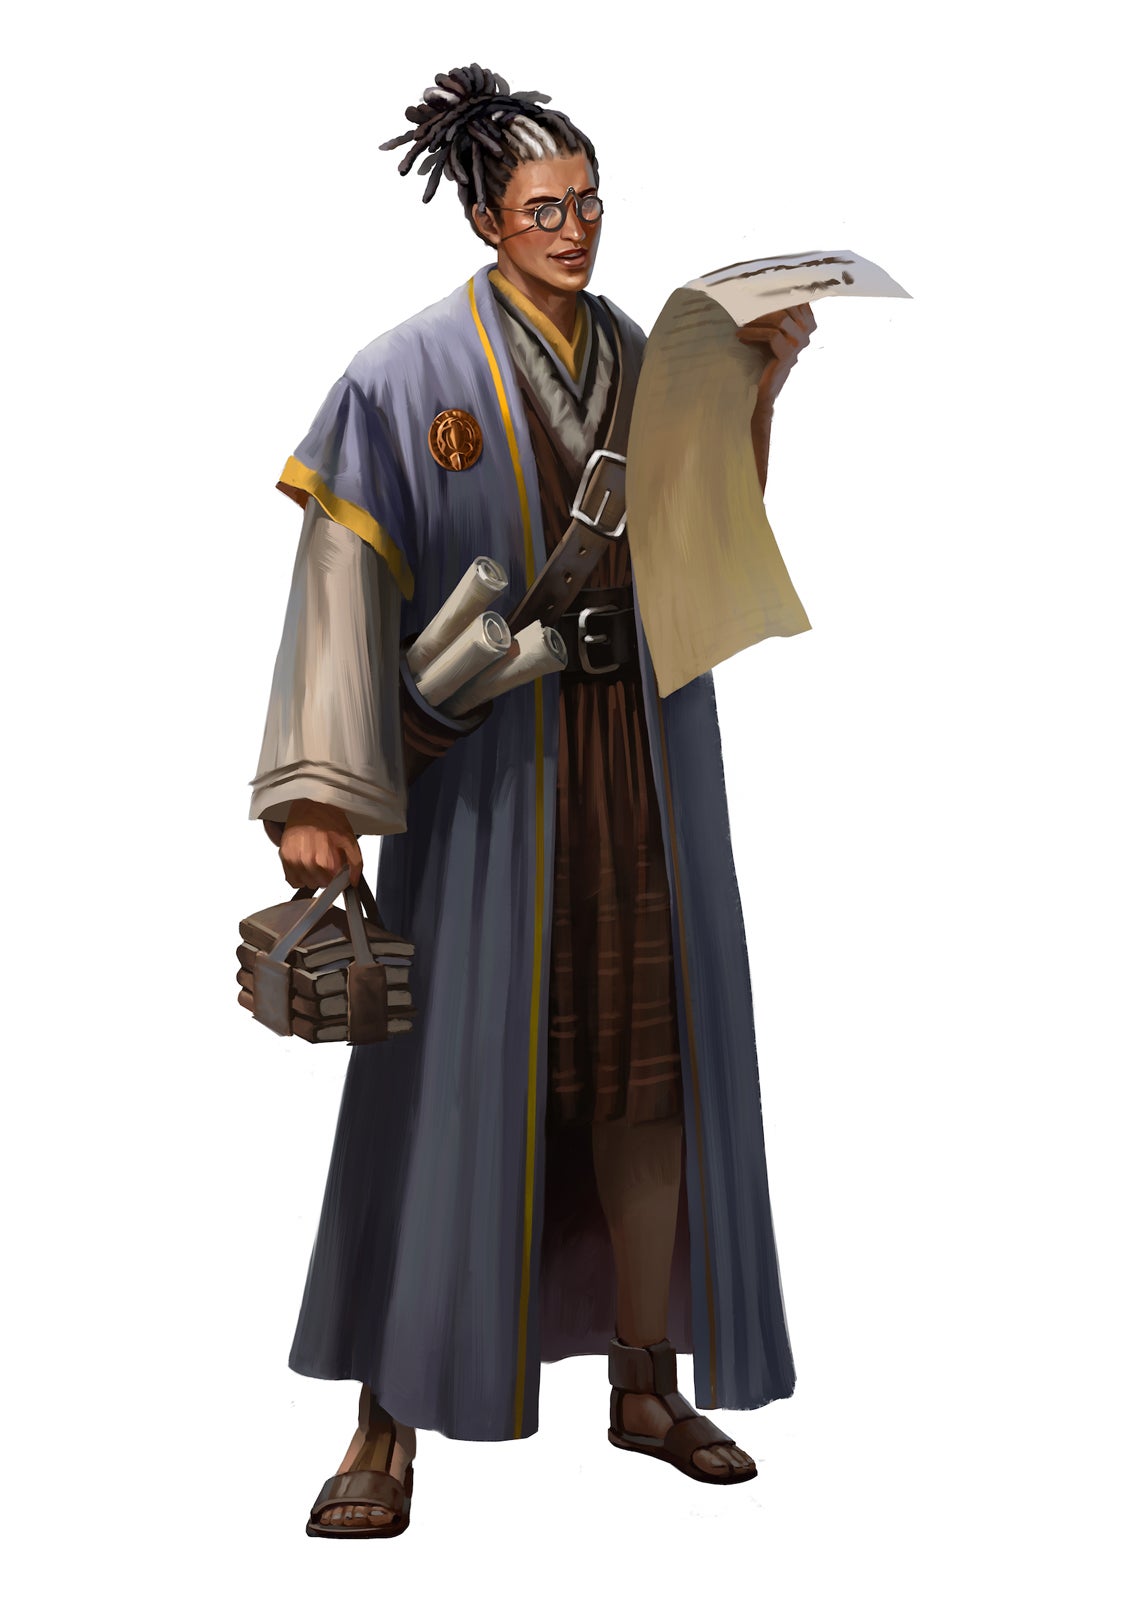 A human man holds several books in one hand and a large scroll in the other. He is wearing a robe and a pair of glasses to help him read the scroll